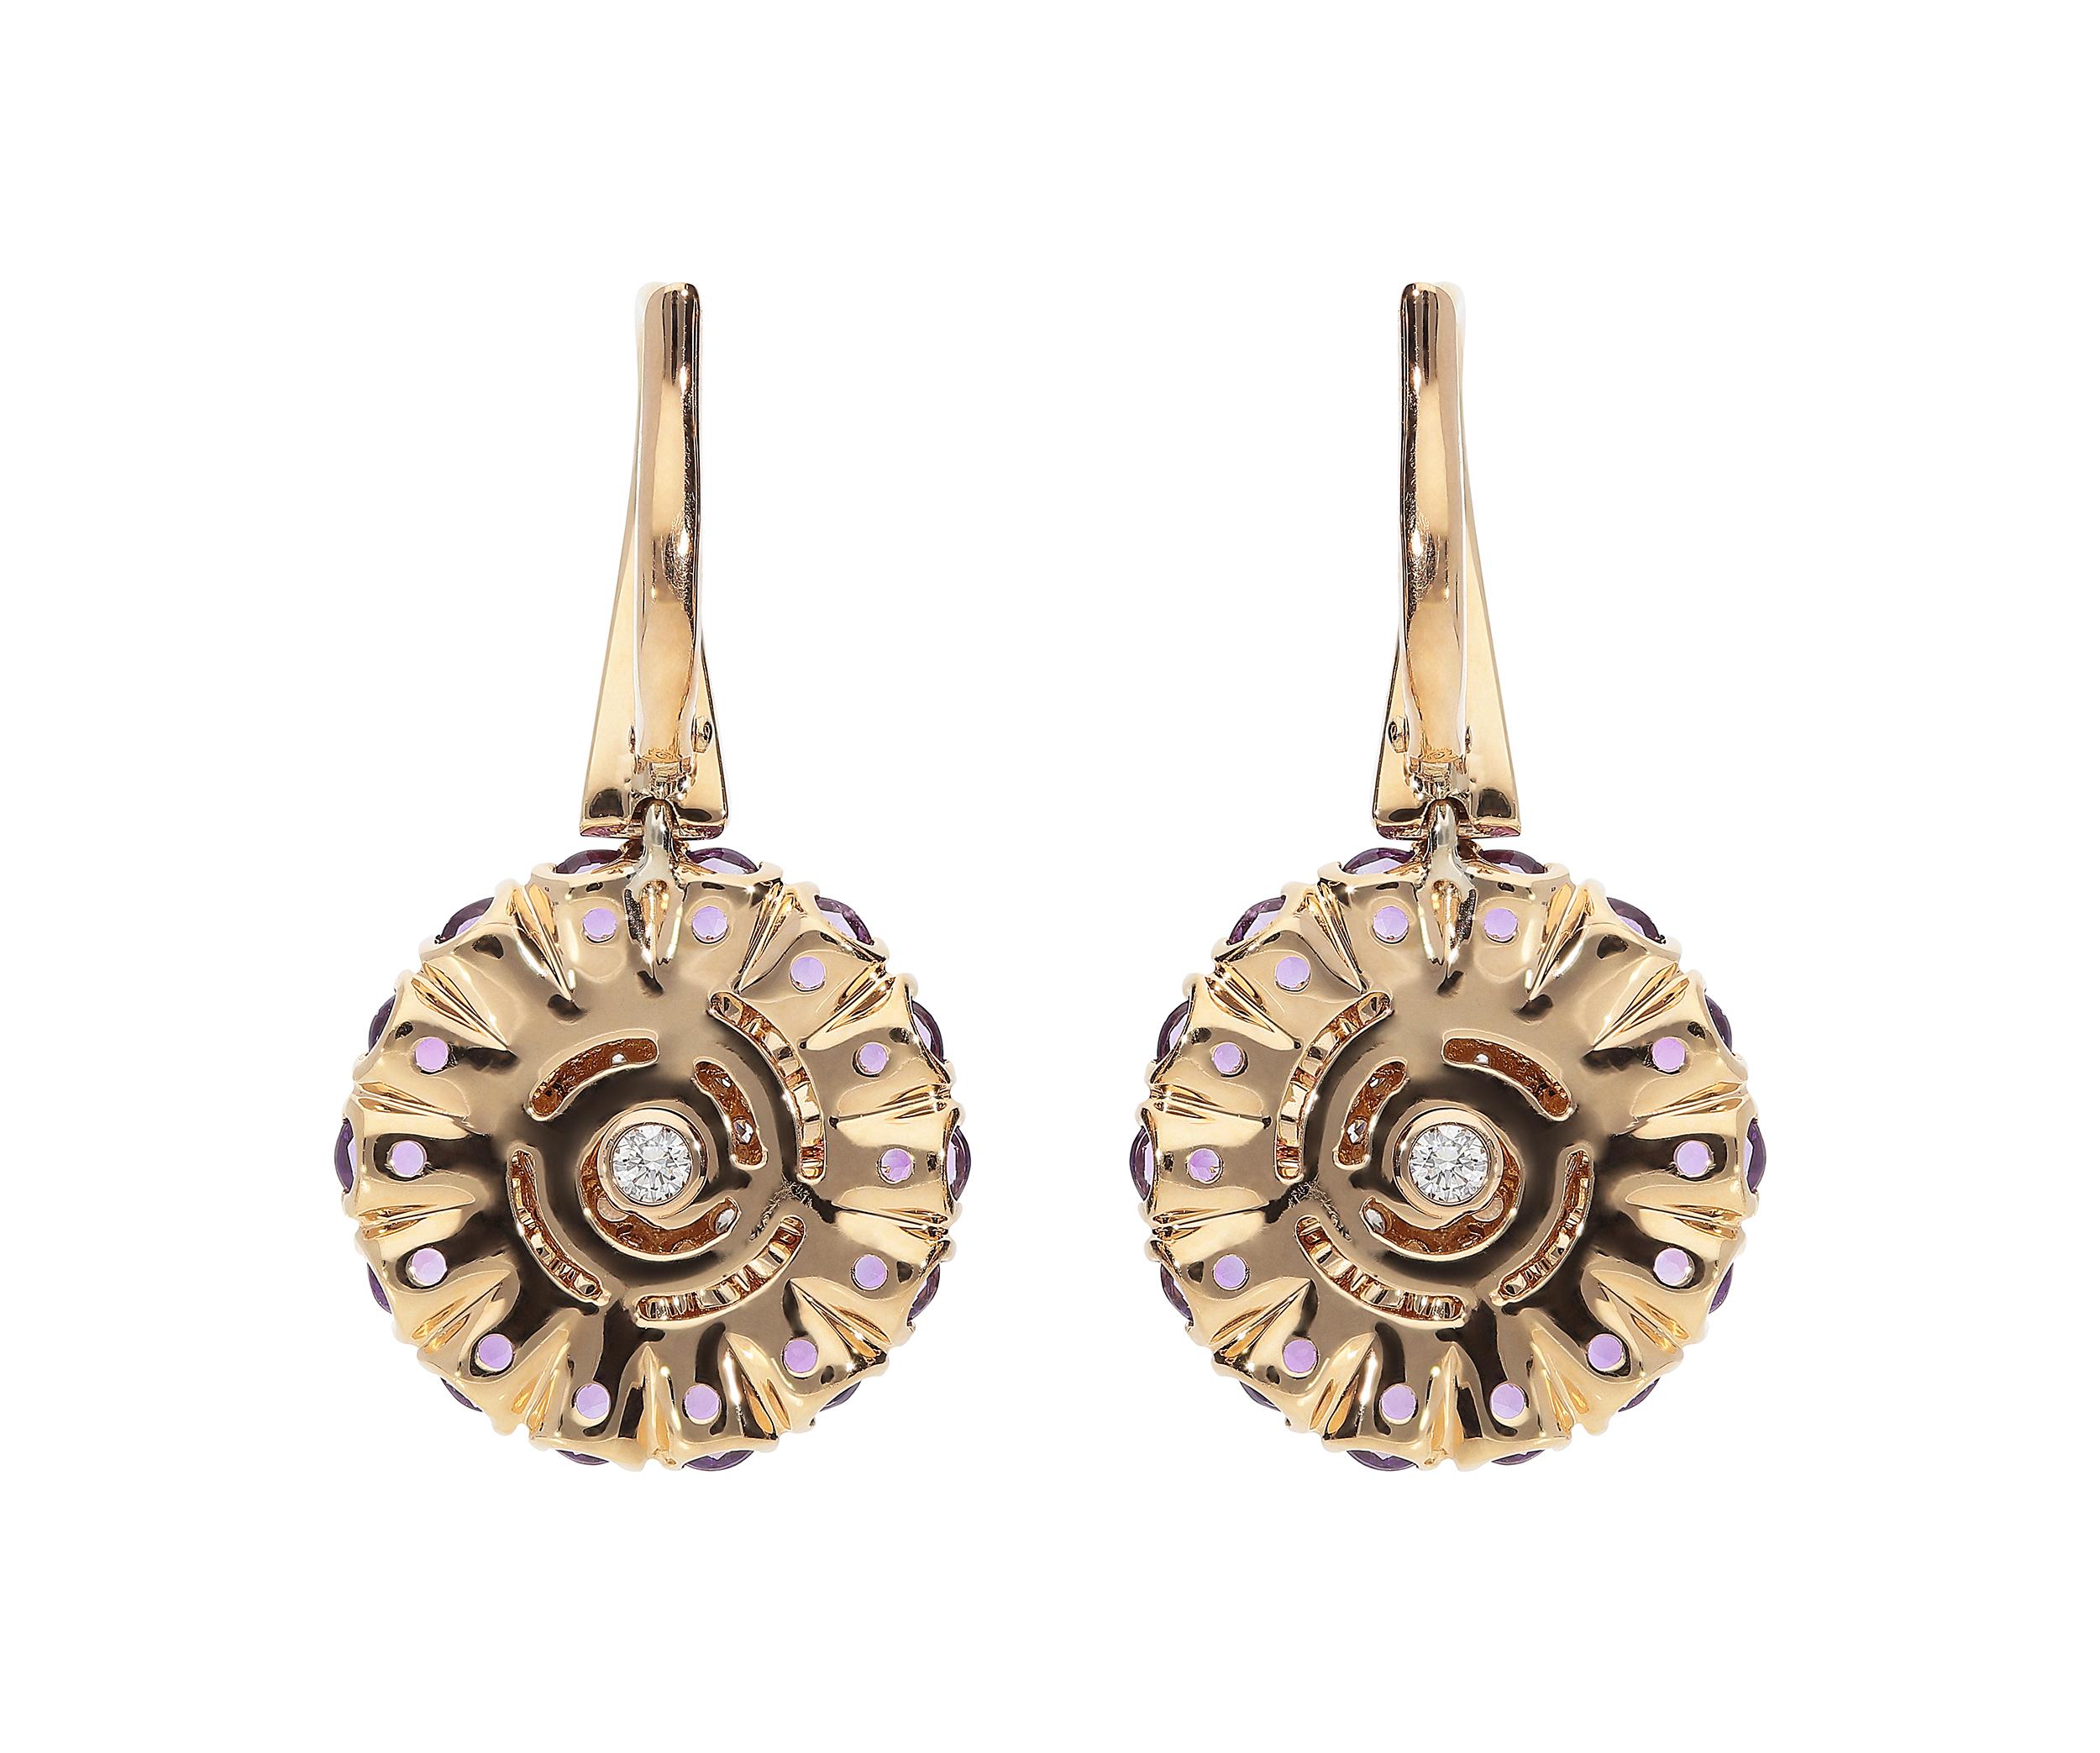 Round Cut 0.49 White GSI 0.55 Brown Diamonds 1.48 Amethyst 18kt Pink Gold Dangle Earrings For Sale